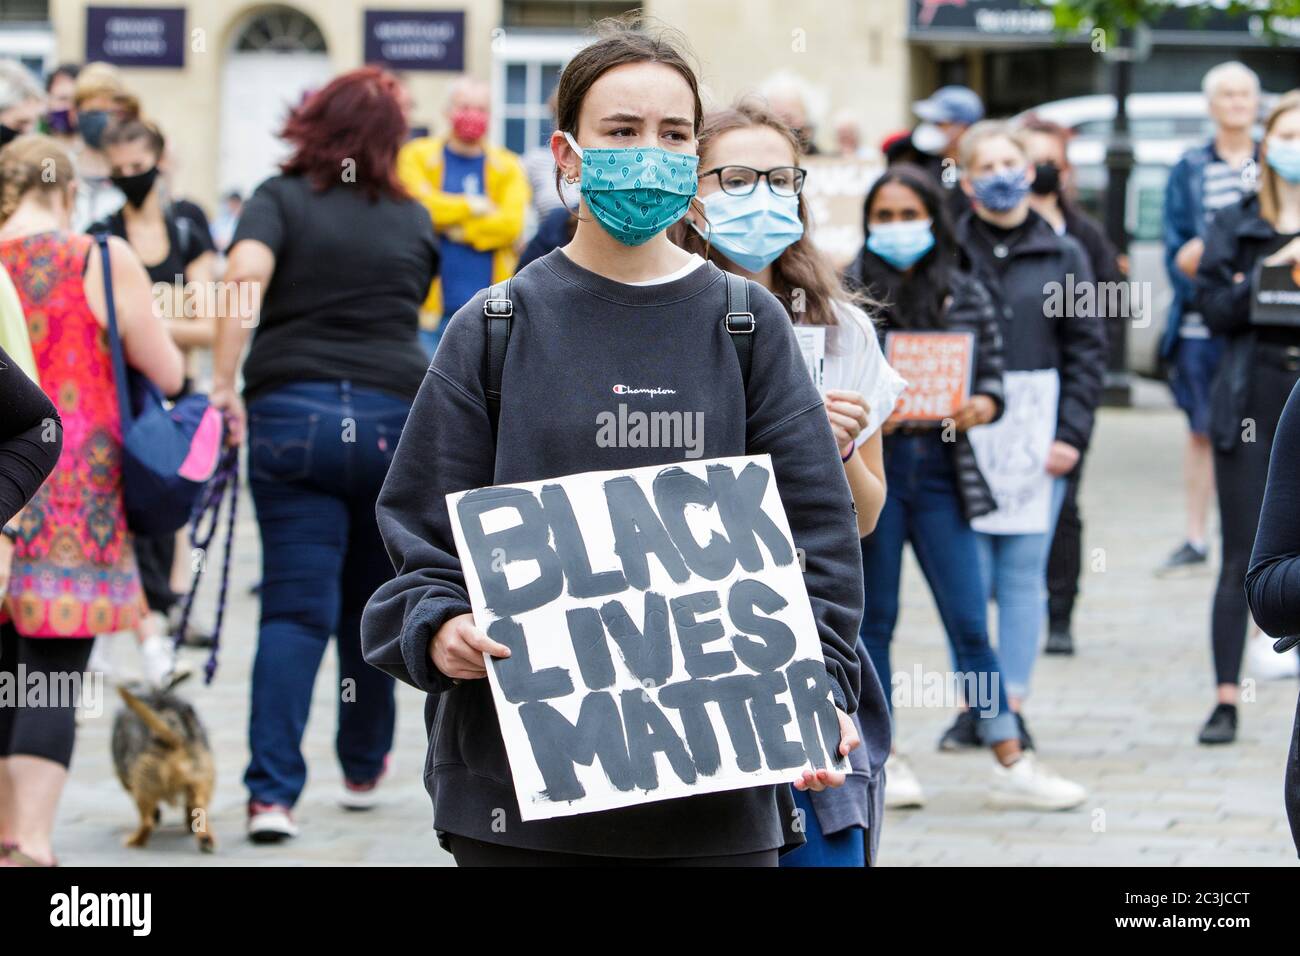 Chippenham, Wiltshire, UK. 20th June, 2020. BLM Protesters abiding by social distancing rules are pictured taking part in a ‘black lives matter’ BLM protest in the town's Market Place. The rally was organised in order for local people to draw attention to racism in the UK and to show solidarity with other BLM protests that have been taking place around the world after the death of George Floyd who died in police custody on 25th May in Minneapolis. Credit: Lynchpics/Alamy Live News Stock Photo